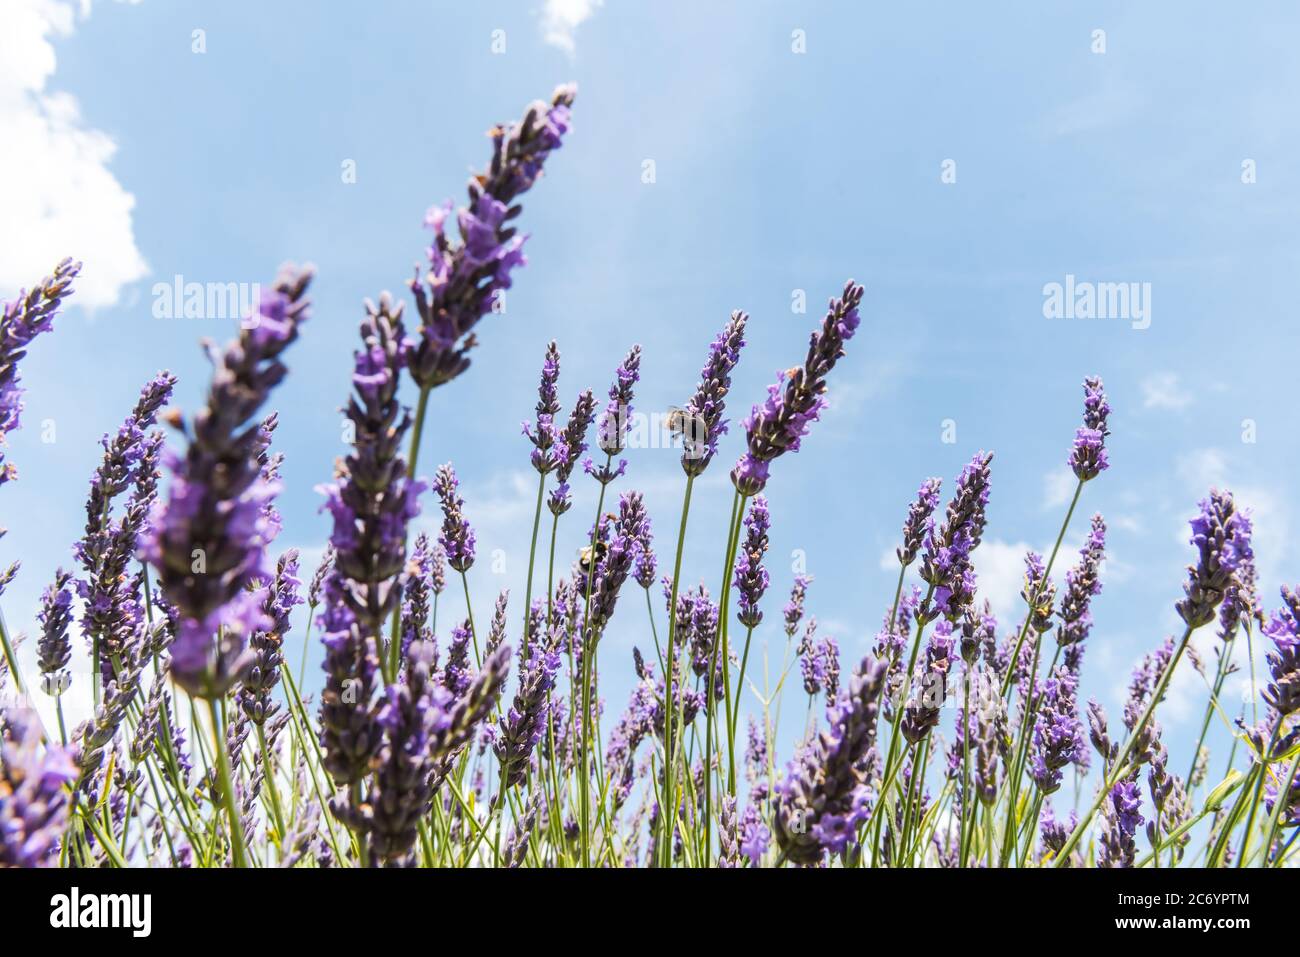 Lavender flowers in flower field rows against sunny blue sky Stock Photo